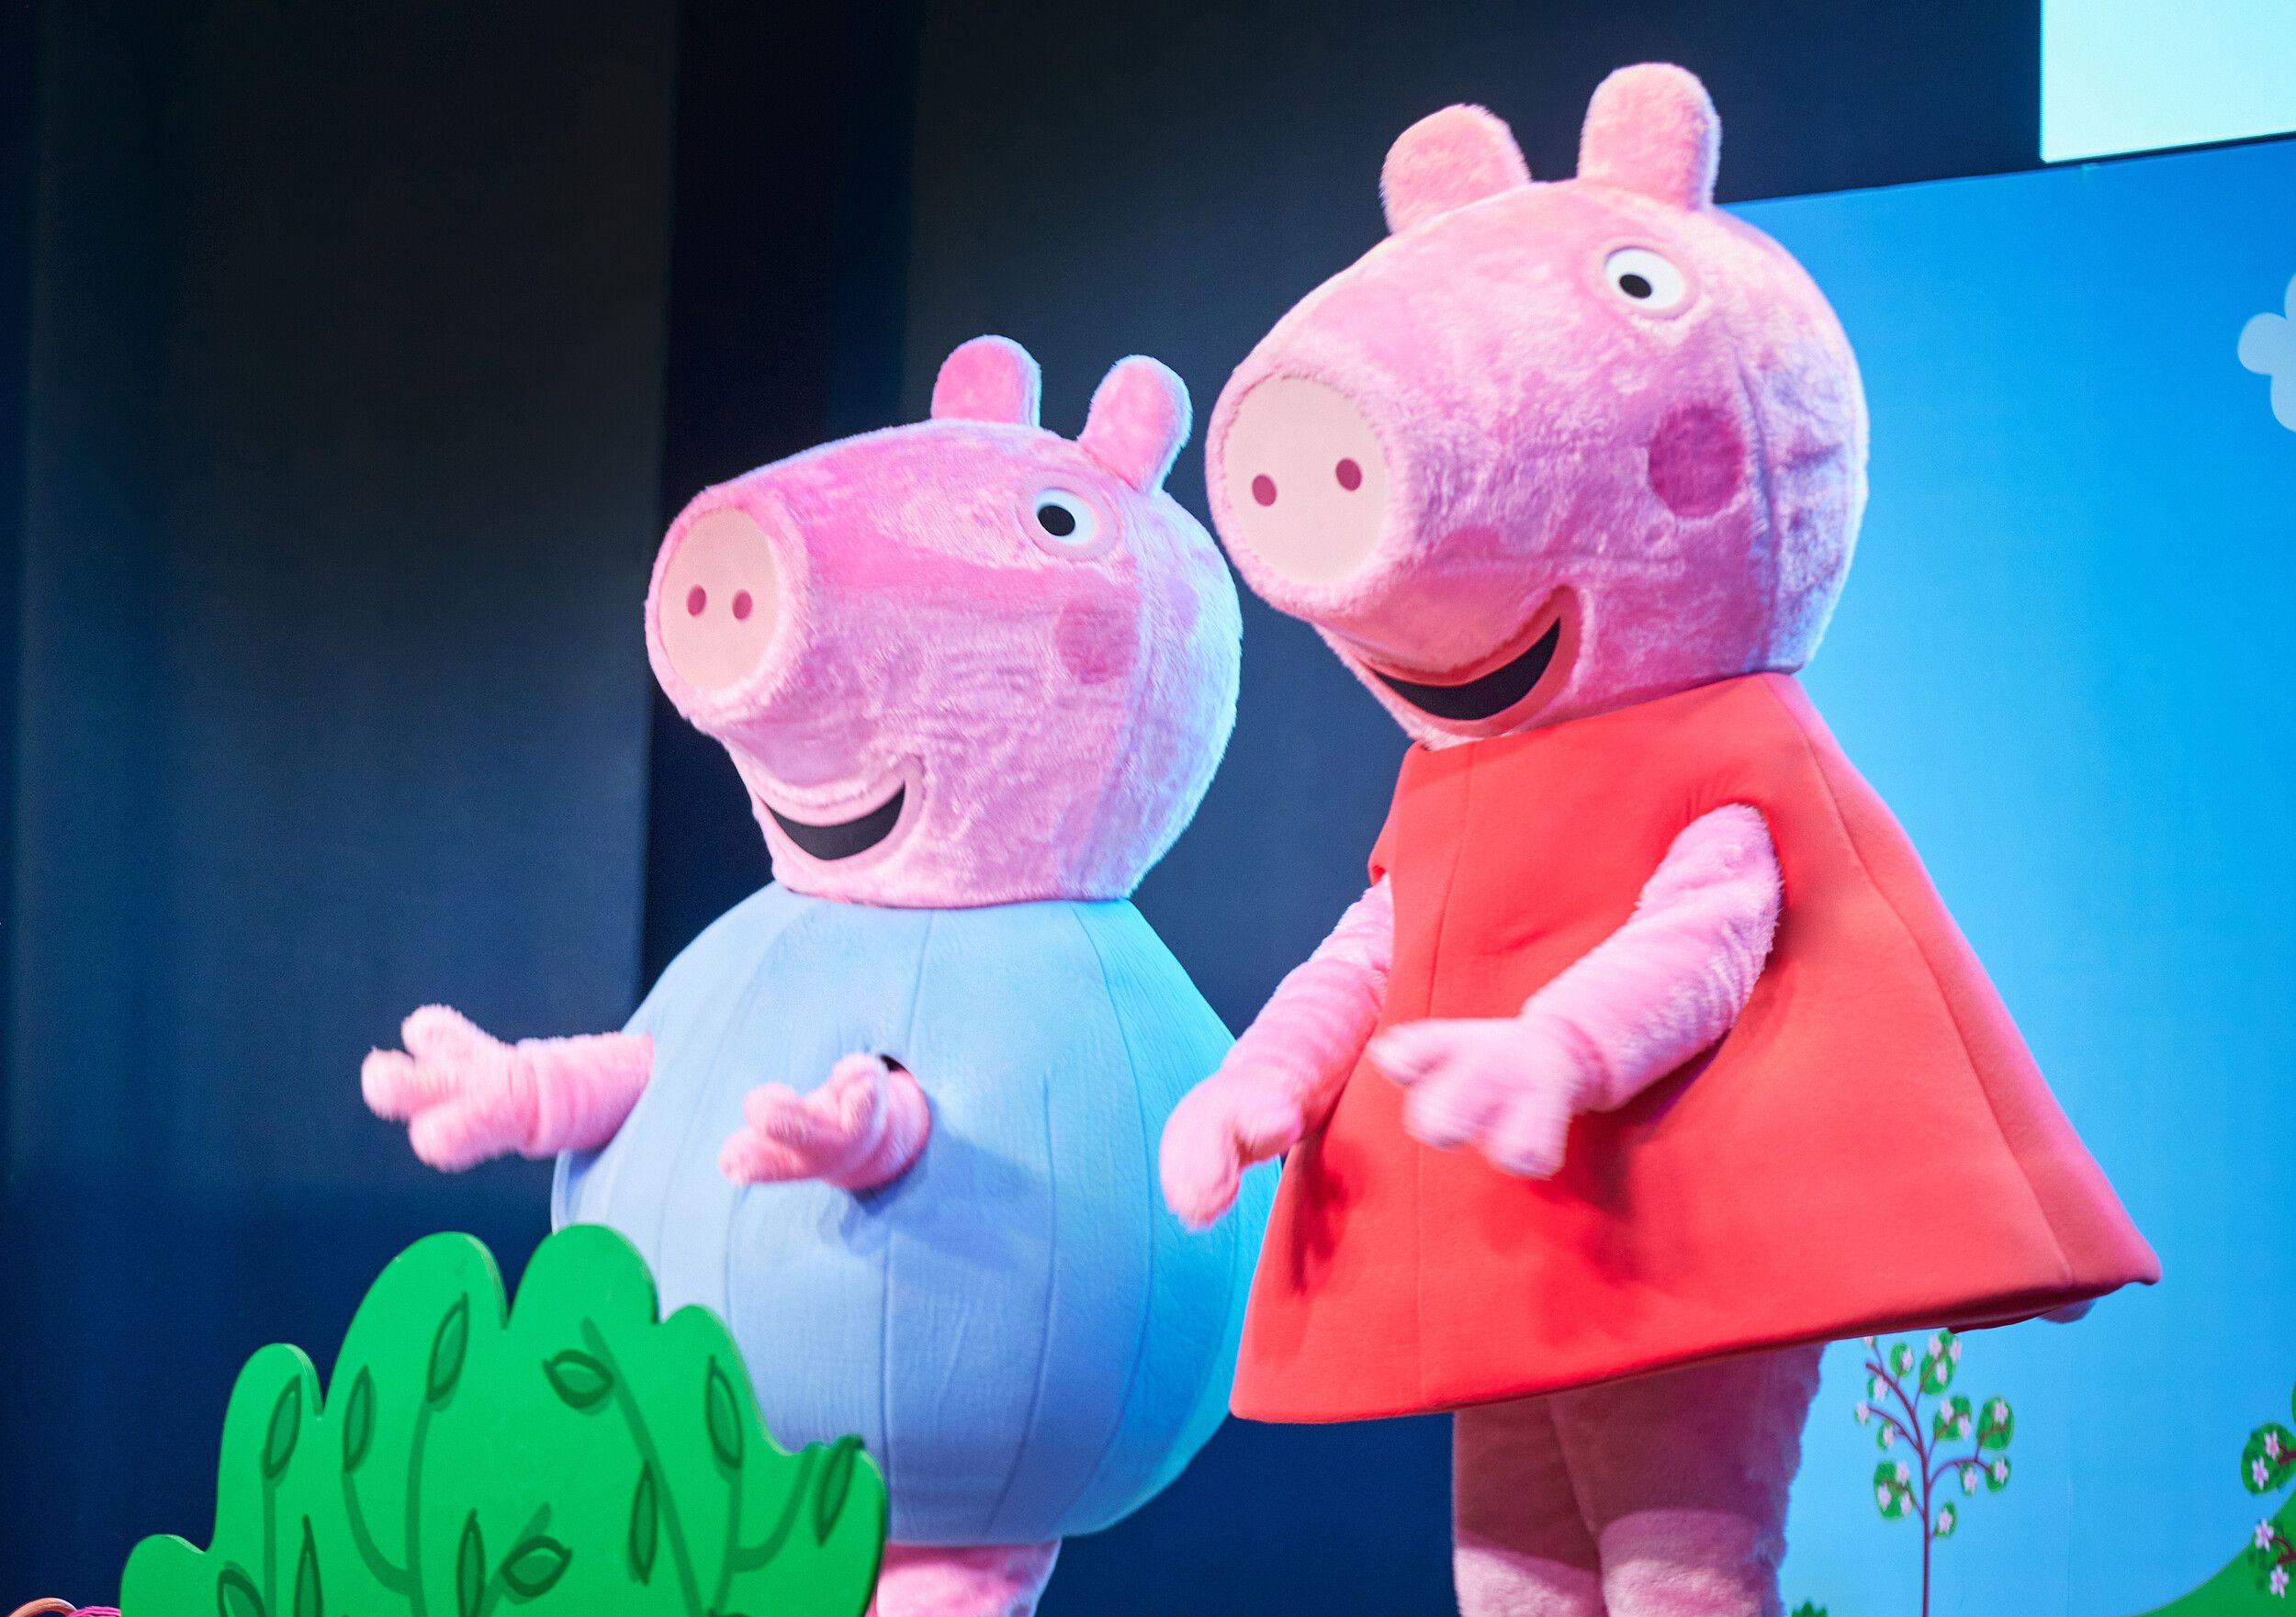 Brexit could 'harm' Peppa Pig – POLITICO